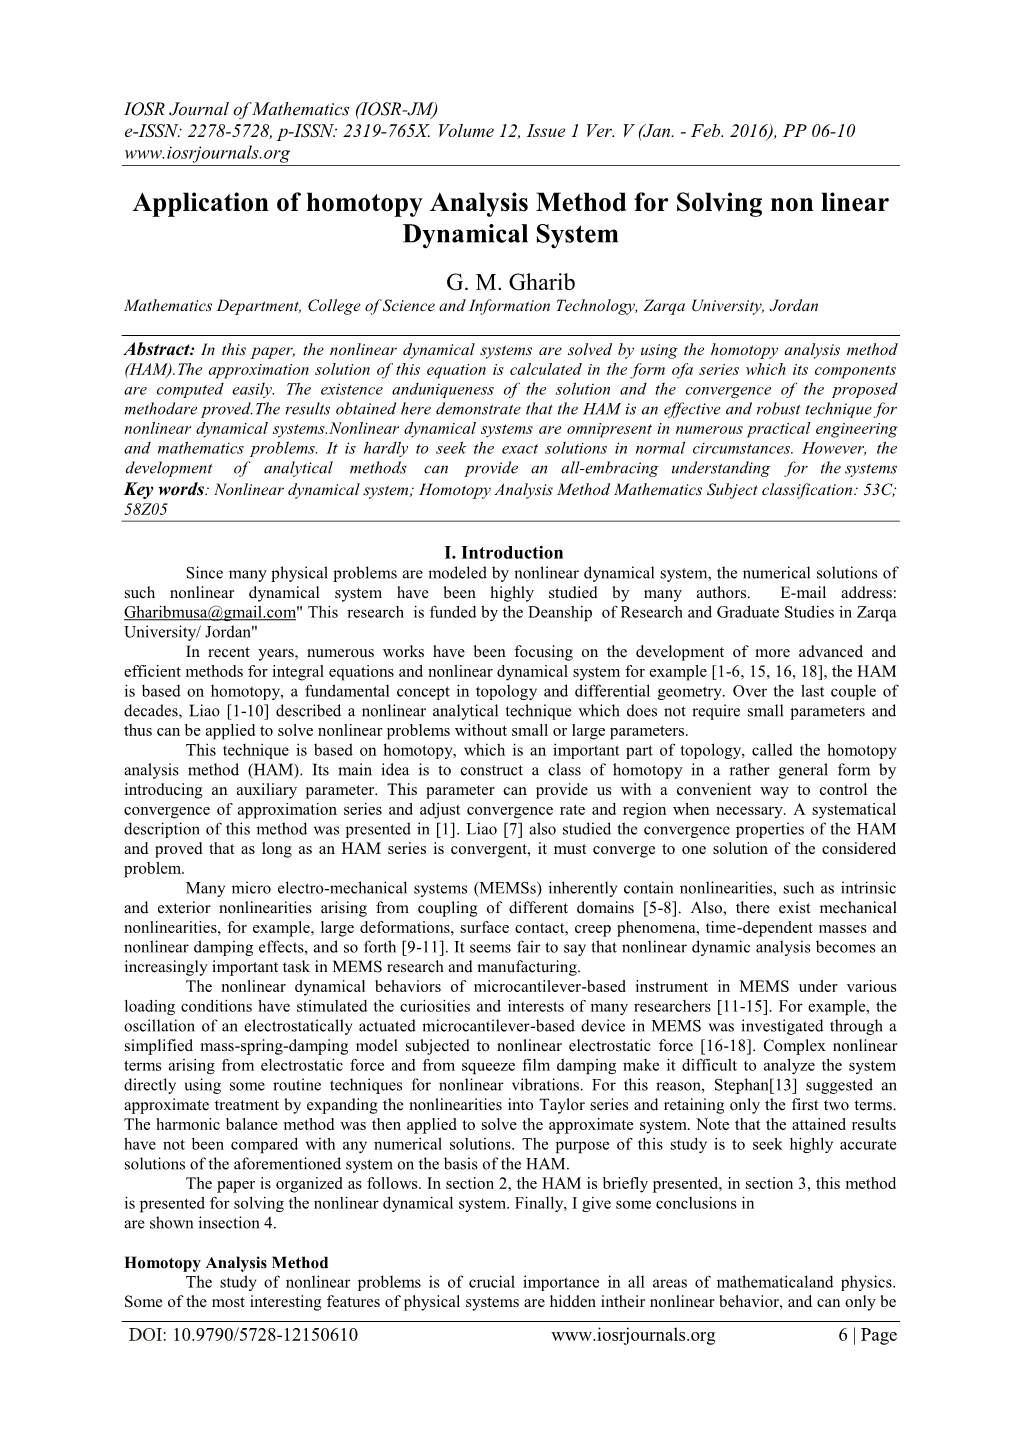 Application of Homotopy Analysis Method for Solving Non Linear Dynamical System